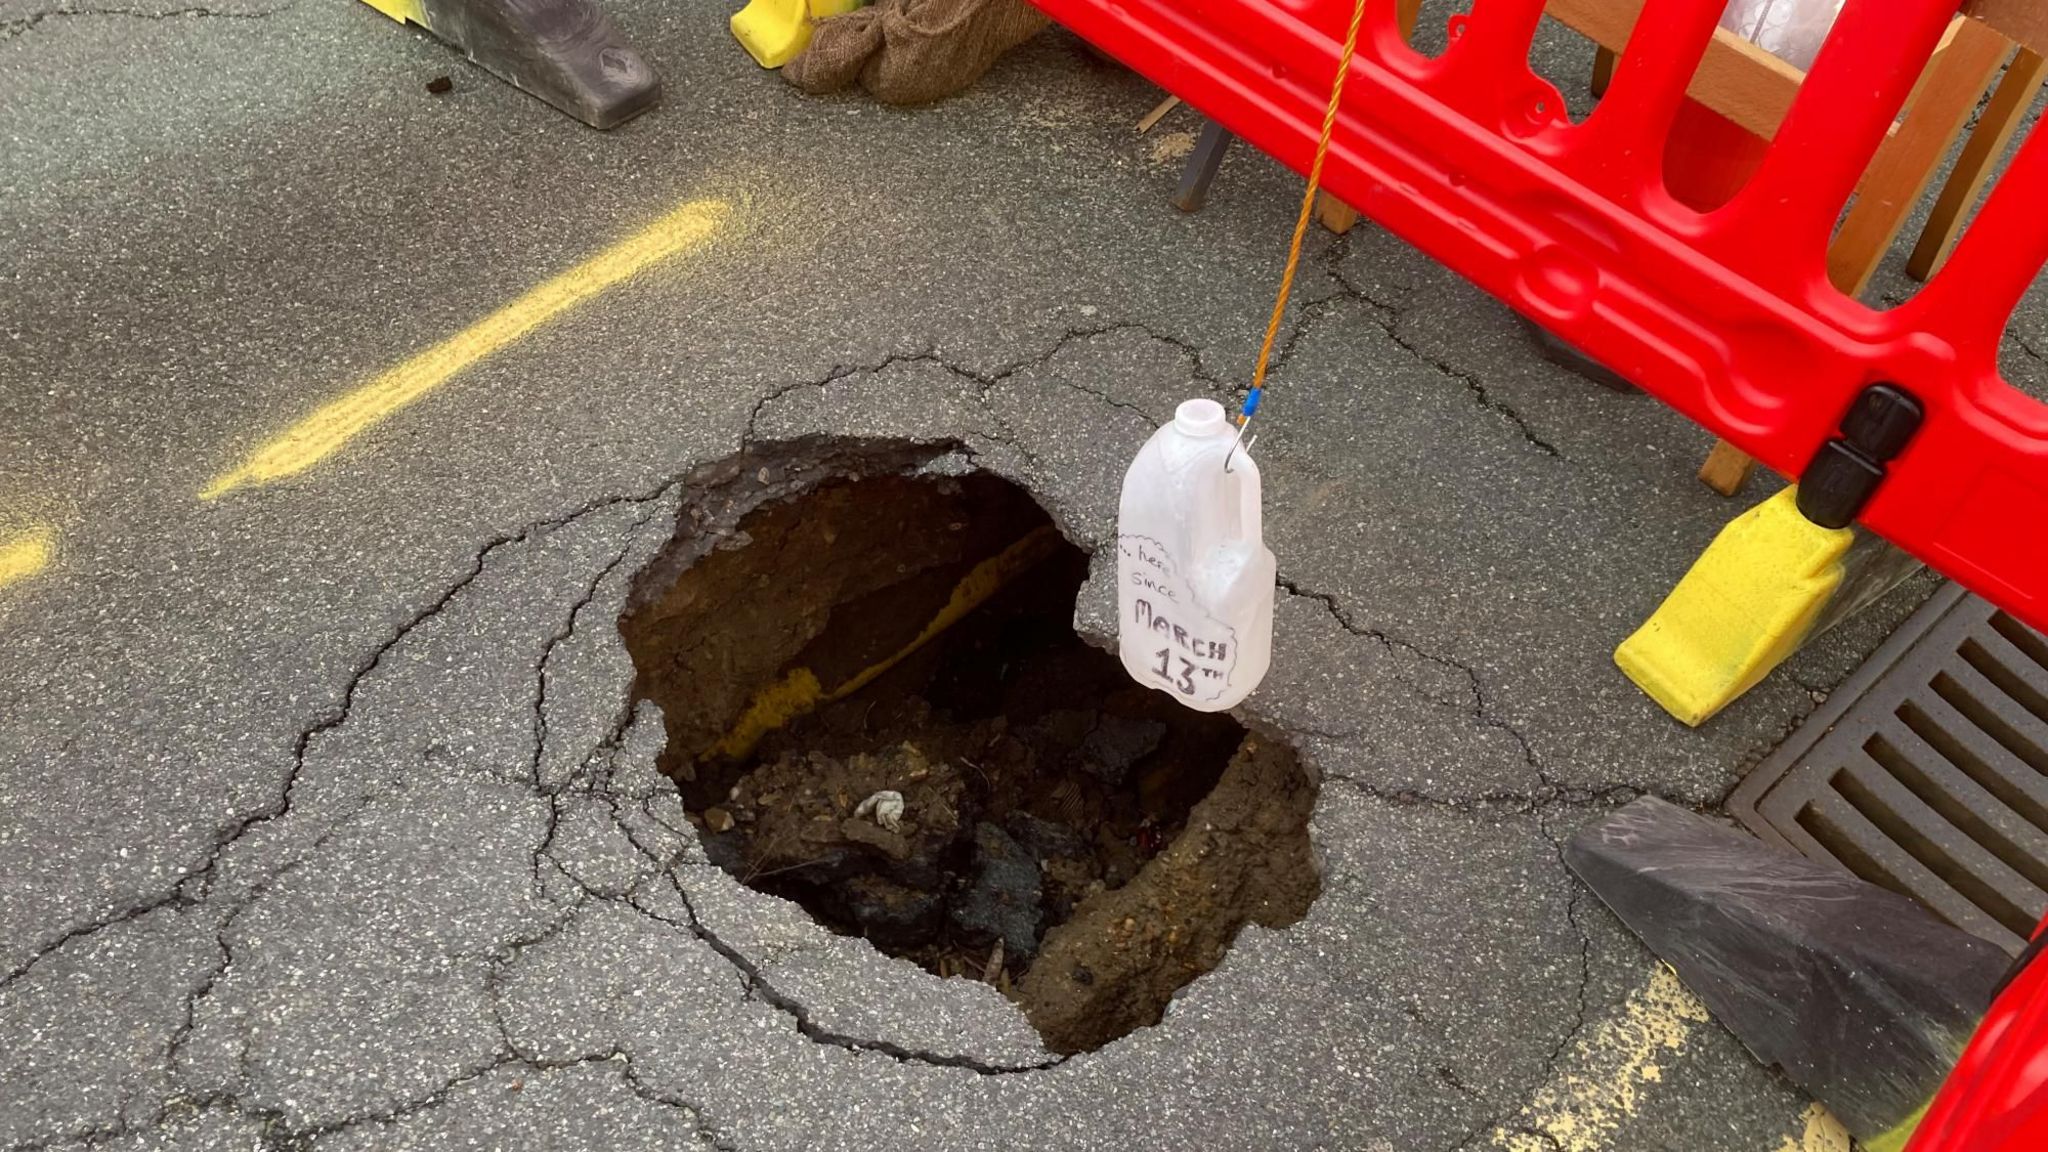 A sinkhole in the surface of High Street, Ipswich, with a plastic bottle dangling over it